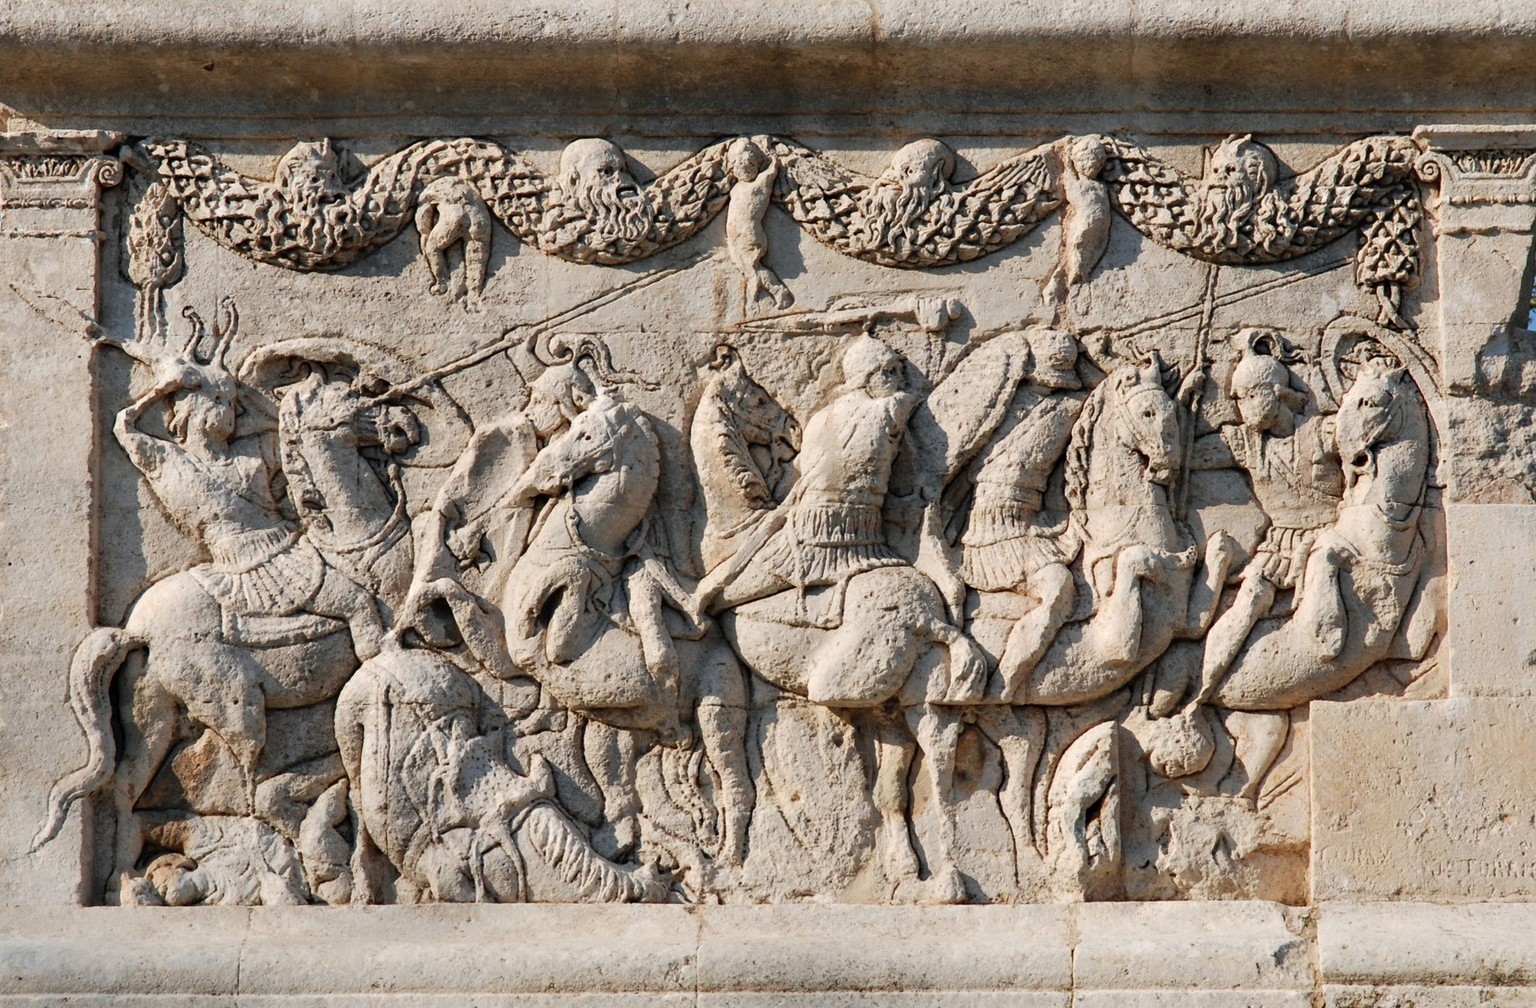 North face of the Mausoleum of Glanum, southern France, showing a cavalry battle, c. 40 BC